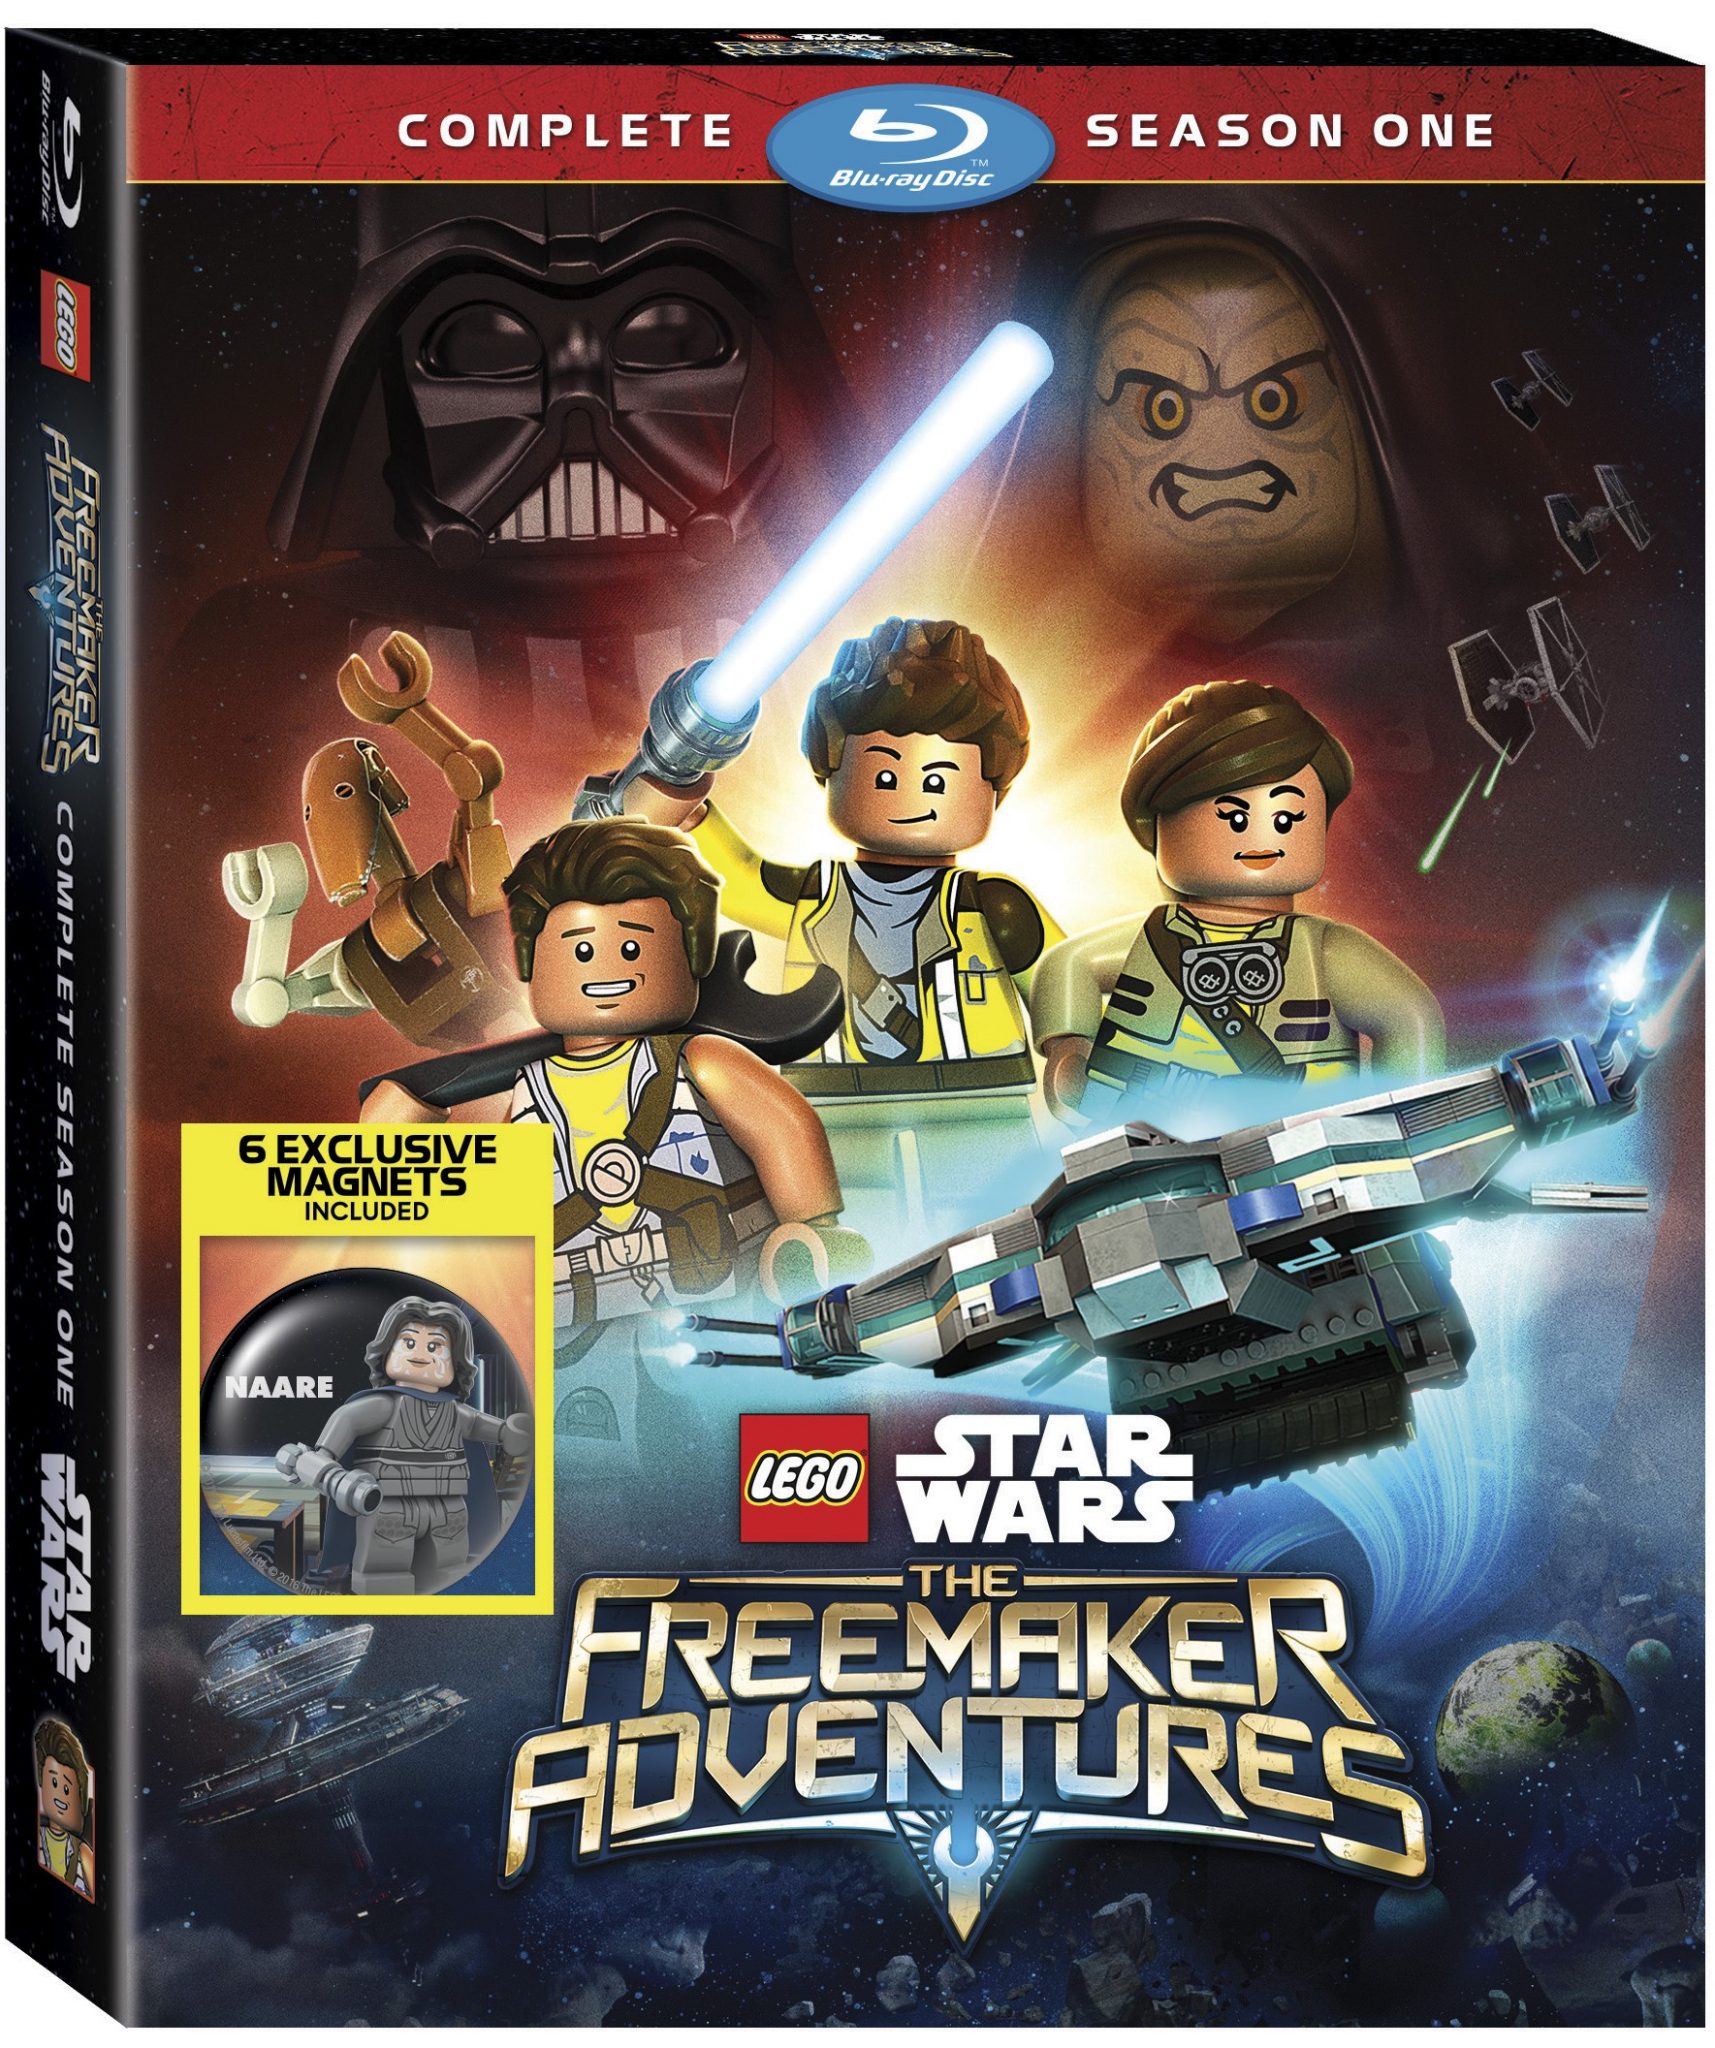 Lego Star Wars Freemaker Season One on Blu-ray and DVD This December